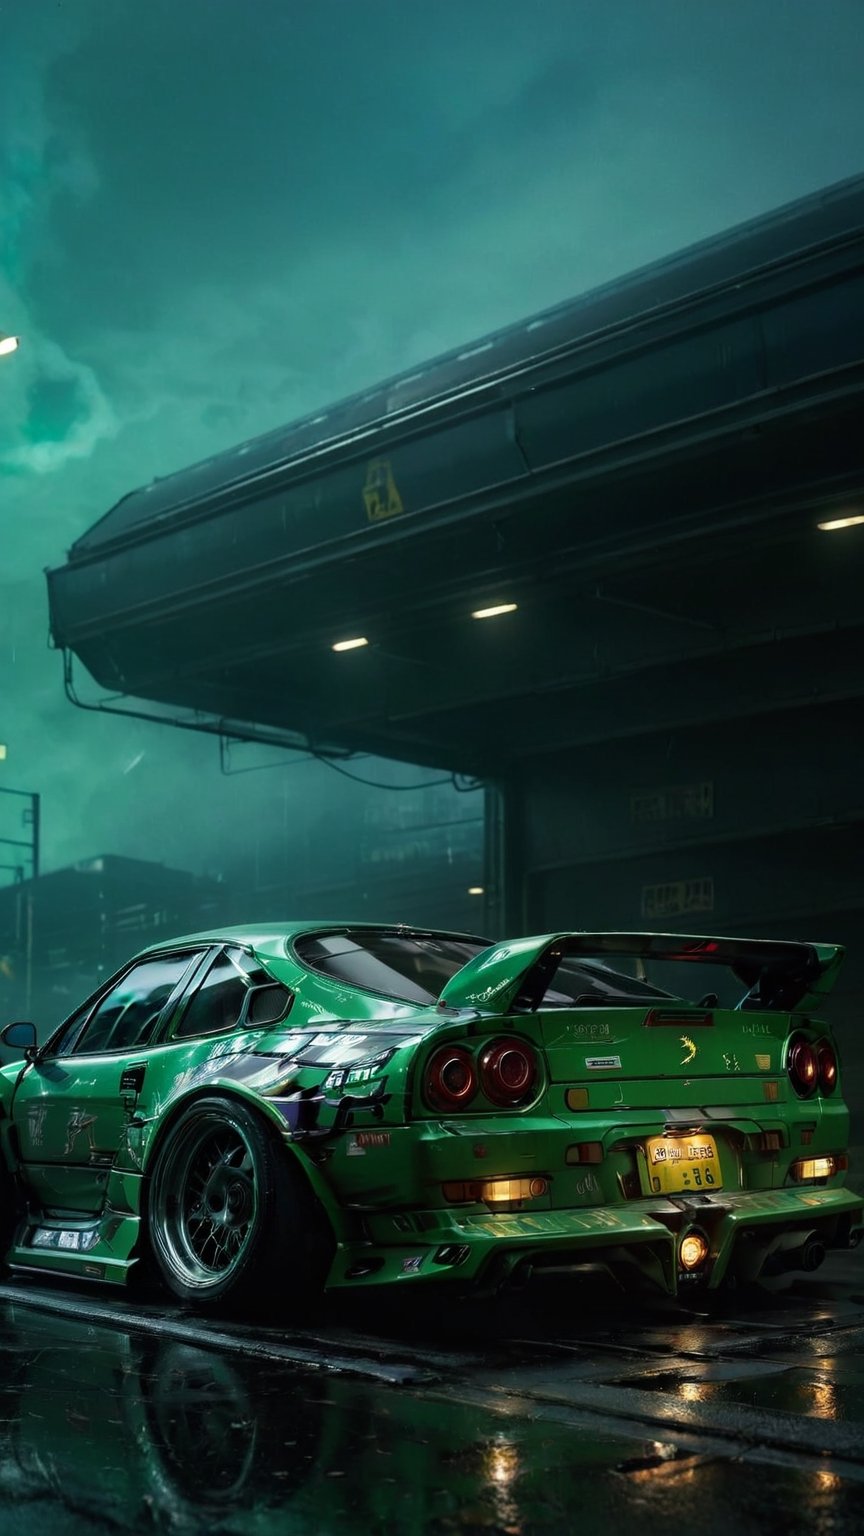 Horror, epic, cowboy shot, cinematic , (photo of apocalyptic  1987 Ferrari  F40) , (Twisted_metal inspired, Wes Anderson film,  pink pastel colours, sage_green colours, metallic,  BBS rims, Works rims, whole car), (lot bullet_holes on car), chaiotic design, complex design, wide body, drift camber set up , lowered, vip_stance, tucking wheels,, (chrome rims, stanced, sci-fi, scrappy,  scraps and bolts on car, rusty, furturistic, cyber_punk, steam_punk, makeshift ram_bar, M4A1 rifles mounted to car, spikes, apocalyptic,  handmade armor on vehicle, chaotic wiring/cabling, chaiotic cyber_punk car modifications)
,
(best quality, deep colours, dark, dark_photography, horror, midnight,  exquisite details, 8k, real_life, Masterpiece, high quality, realism, HD, chaotic and complex design, very detailed),
,
(apocalyptic Las_Vegas strip background, overgrown background, simple background), blood, zombies walking around, neon_lights under car, neon light, tiny glows, dark sci-fi, dark futuristic, sci-fi characters walking around in background, simple background, mist/fog, midnight, garbage,photo r3al, cinematic moviemaker style,Movie Still,